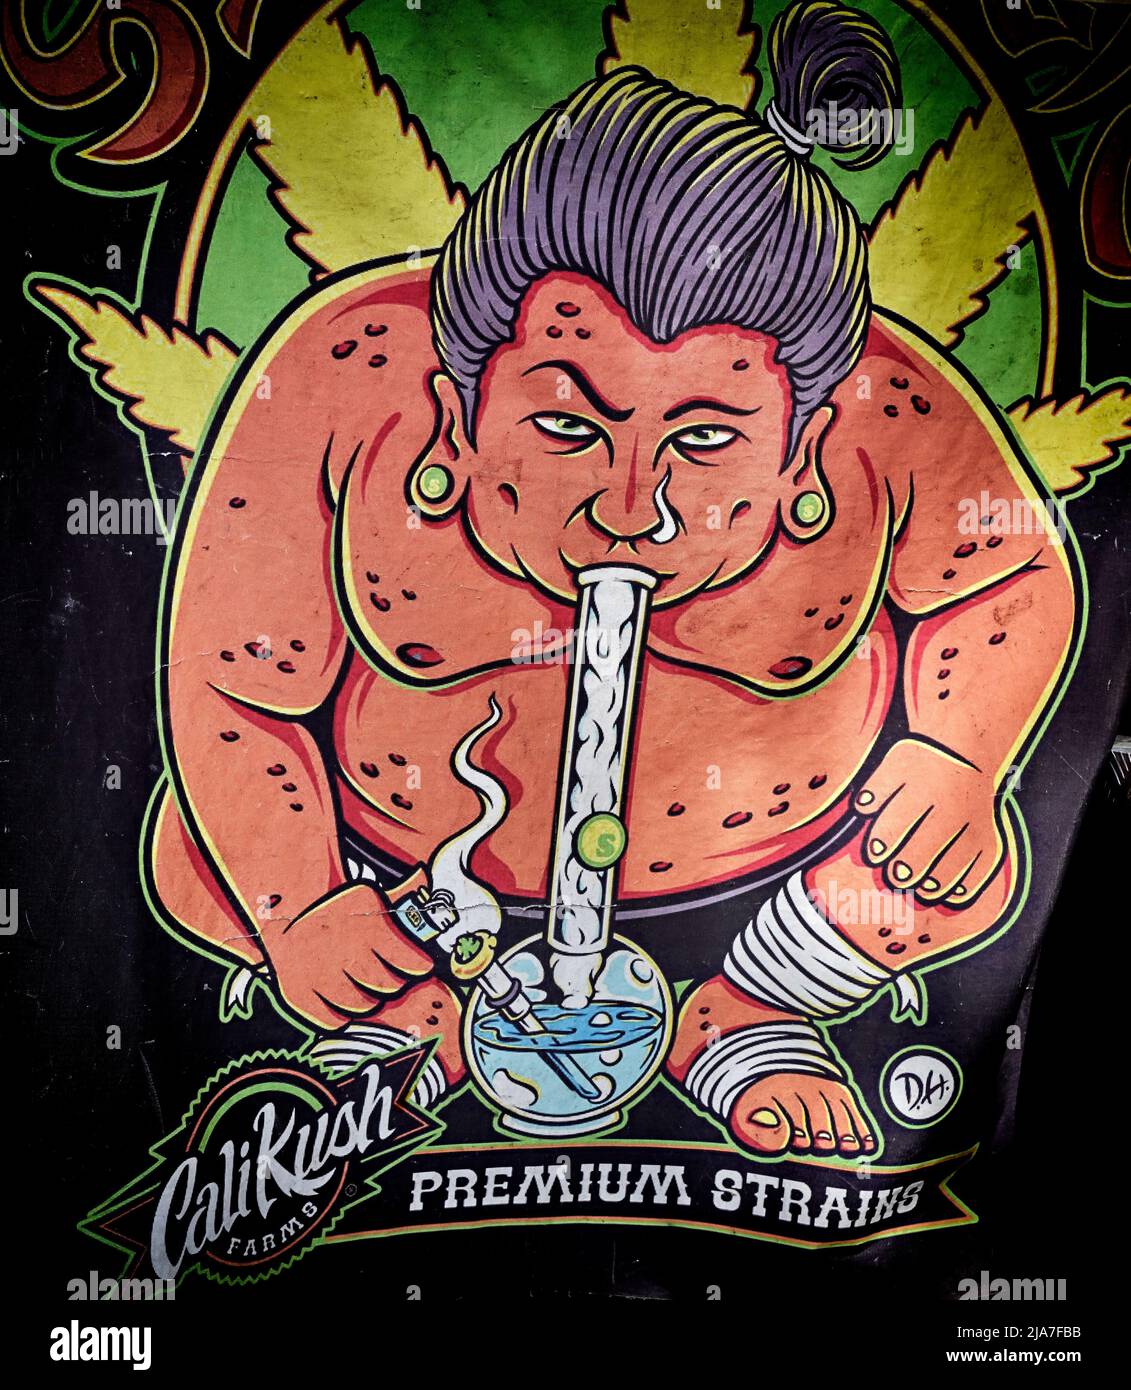 Bong. Illustration of a man smoking a bong water pipe. Thailand Southeast Asia Stock Photo